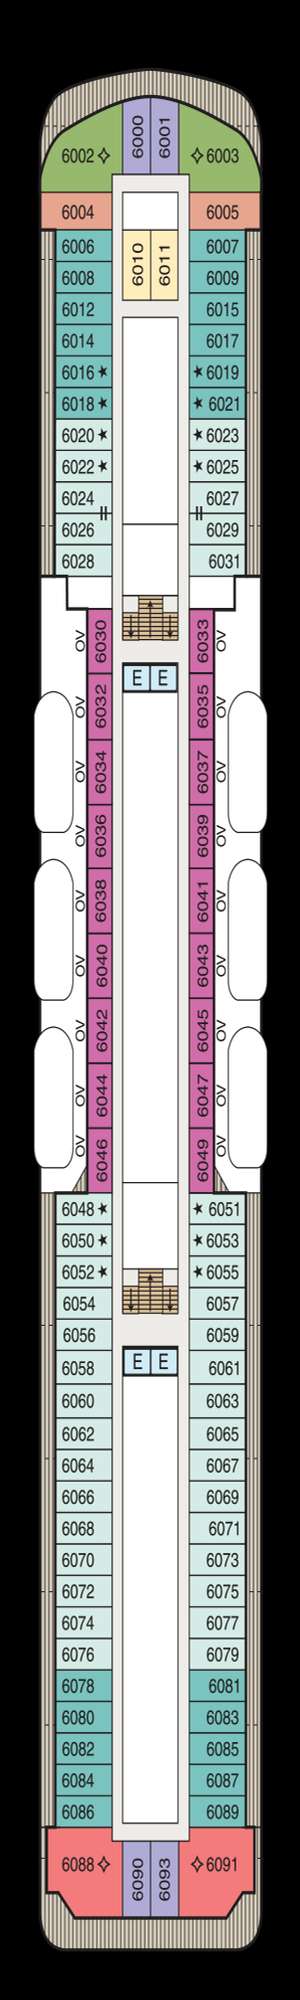 Deck plan for Insignia